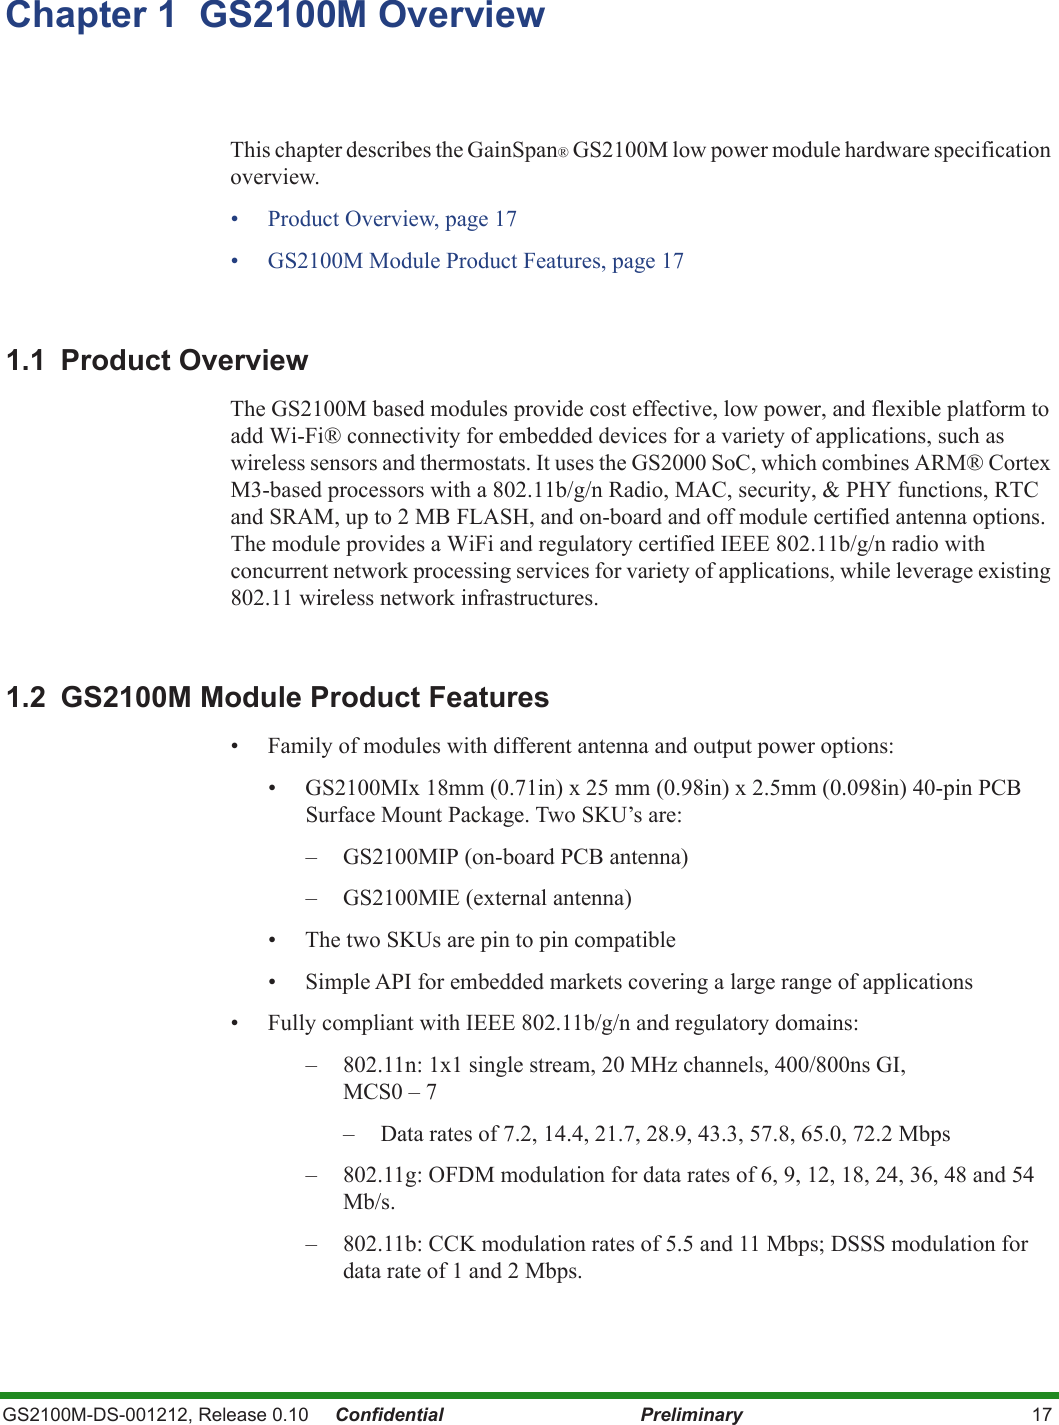 GS2100M-DS-001212, Release 0.10     Confidential Preliminary 17Chapter 1  GS2100M OverviewThis chapter describes the GainSpan® GS2100M low power module hardware specification overview. • Product Overview, page 17• GS2100M Module Product Features, page 171.1 Product OverviewThe GS2100M based modules provide cost effective, low power, and flexible platform to add Wi-Fi® connectivity for embedded devices for a variety of applications, such as wireless sensors and thermostats. It uses the GS2000 SoC, which combines ARM® Cortex M3-based processors with a 802.11b/g/n Radio, MAC, security, &amp; PHY functions, RTC and SRAM, up to 2 MB FLASH, and on-board and off module certified antenna options. The module provides a WiFi and regulatory certified IEEE 802.11b/g/n radio with concurrent network processing services for variety of applications, while leverage existing 802.11 wireless network infrastructures.1.2  GS2100M Module Product Features• Family of modules with different antenna and output power options:• GS2100MIx 18mm (0.71in) x 25 mm (0.98in) x 2.5mm (0.098in) 40-pin PCB Surface Mount Package. Two SKU’s are:– GS2100MIP (on-board PCB antenna)– GS2100MIE (external antenna)• The two SKUs are pin to pin compatible• Simple API for embedded markets covering a large range of applications• Fully compliant with IEEE 802.11b/g/n and regulatory domains:– 802.11n: 1x1 single stream, 20 MHz channels, 400/800ns GI, MCS0 – 7– Data rates of 7.2, 14.4, 21.7, 28.9, 43.3, 57.8, 65.0, 72.2 Mbps– 802.11g: OFDM modulation for data rates of 6, 9, 12, 18, 24, 36, 48 and 54 Mb/s.– 802.11b: CCK modulation rates of 5.5 and 11 Mbps; DSSS modulation for data rate of 1 and 2 Mbps.